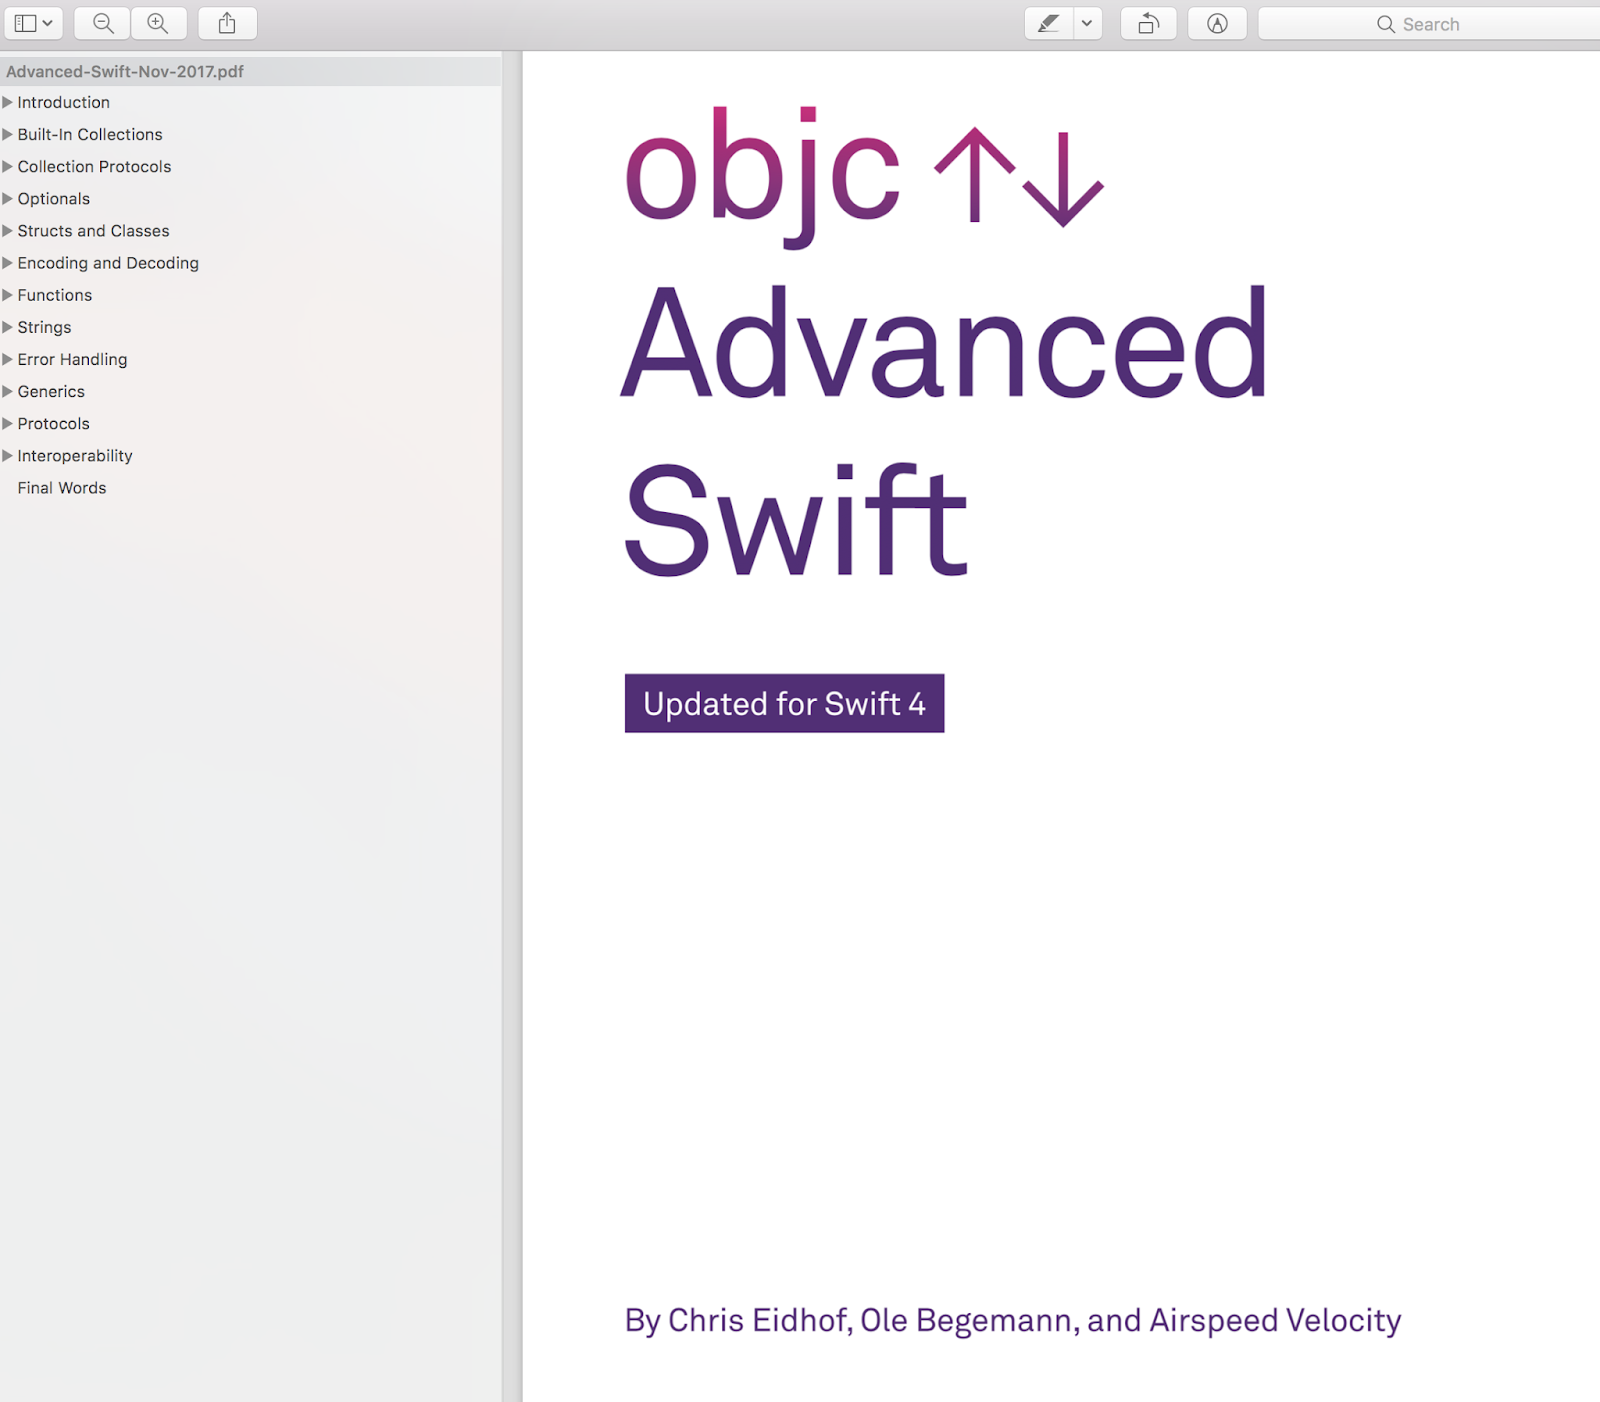 advanced swift updated for swift 4 pdf download